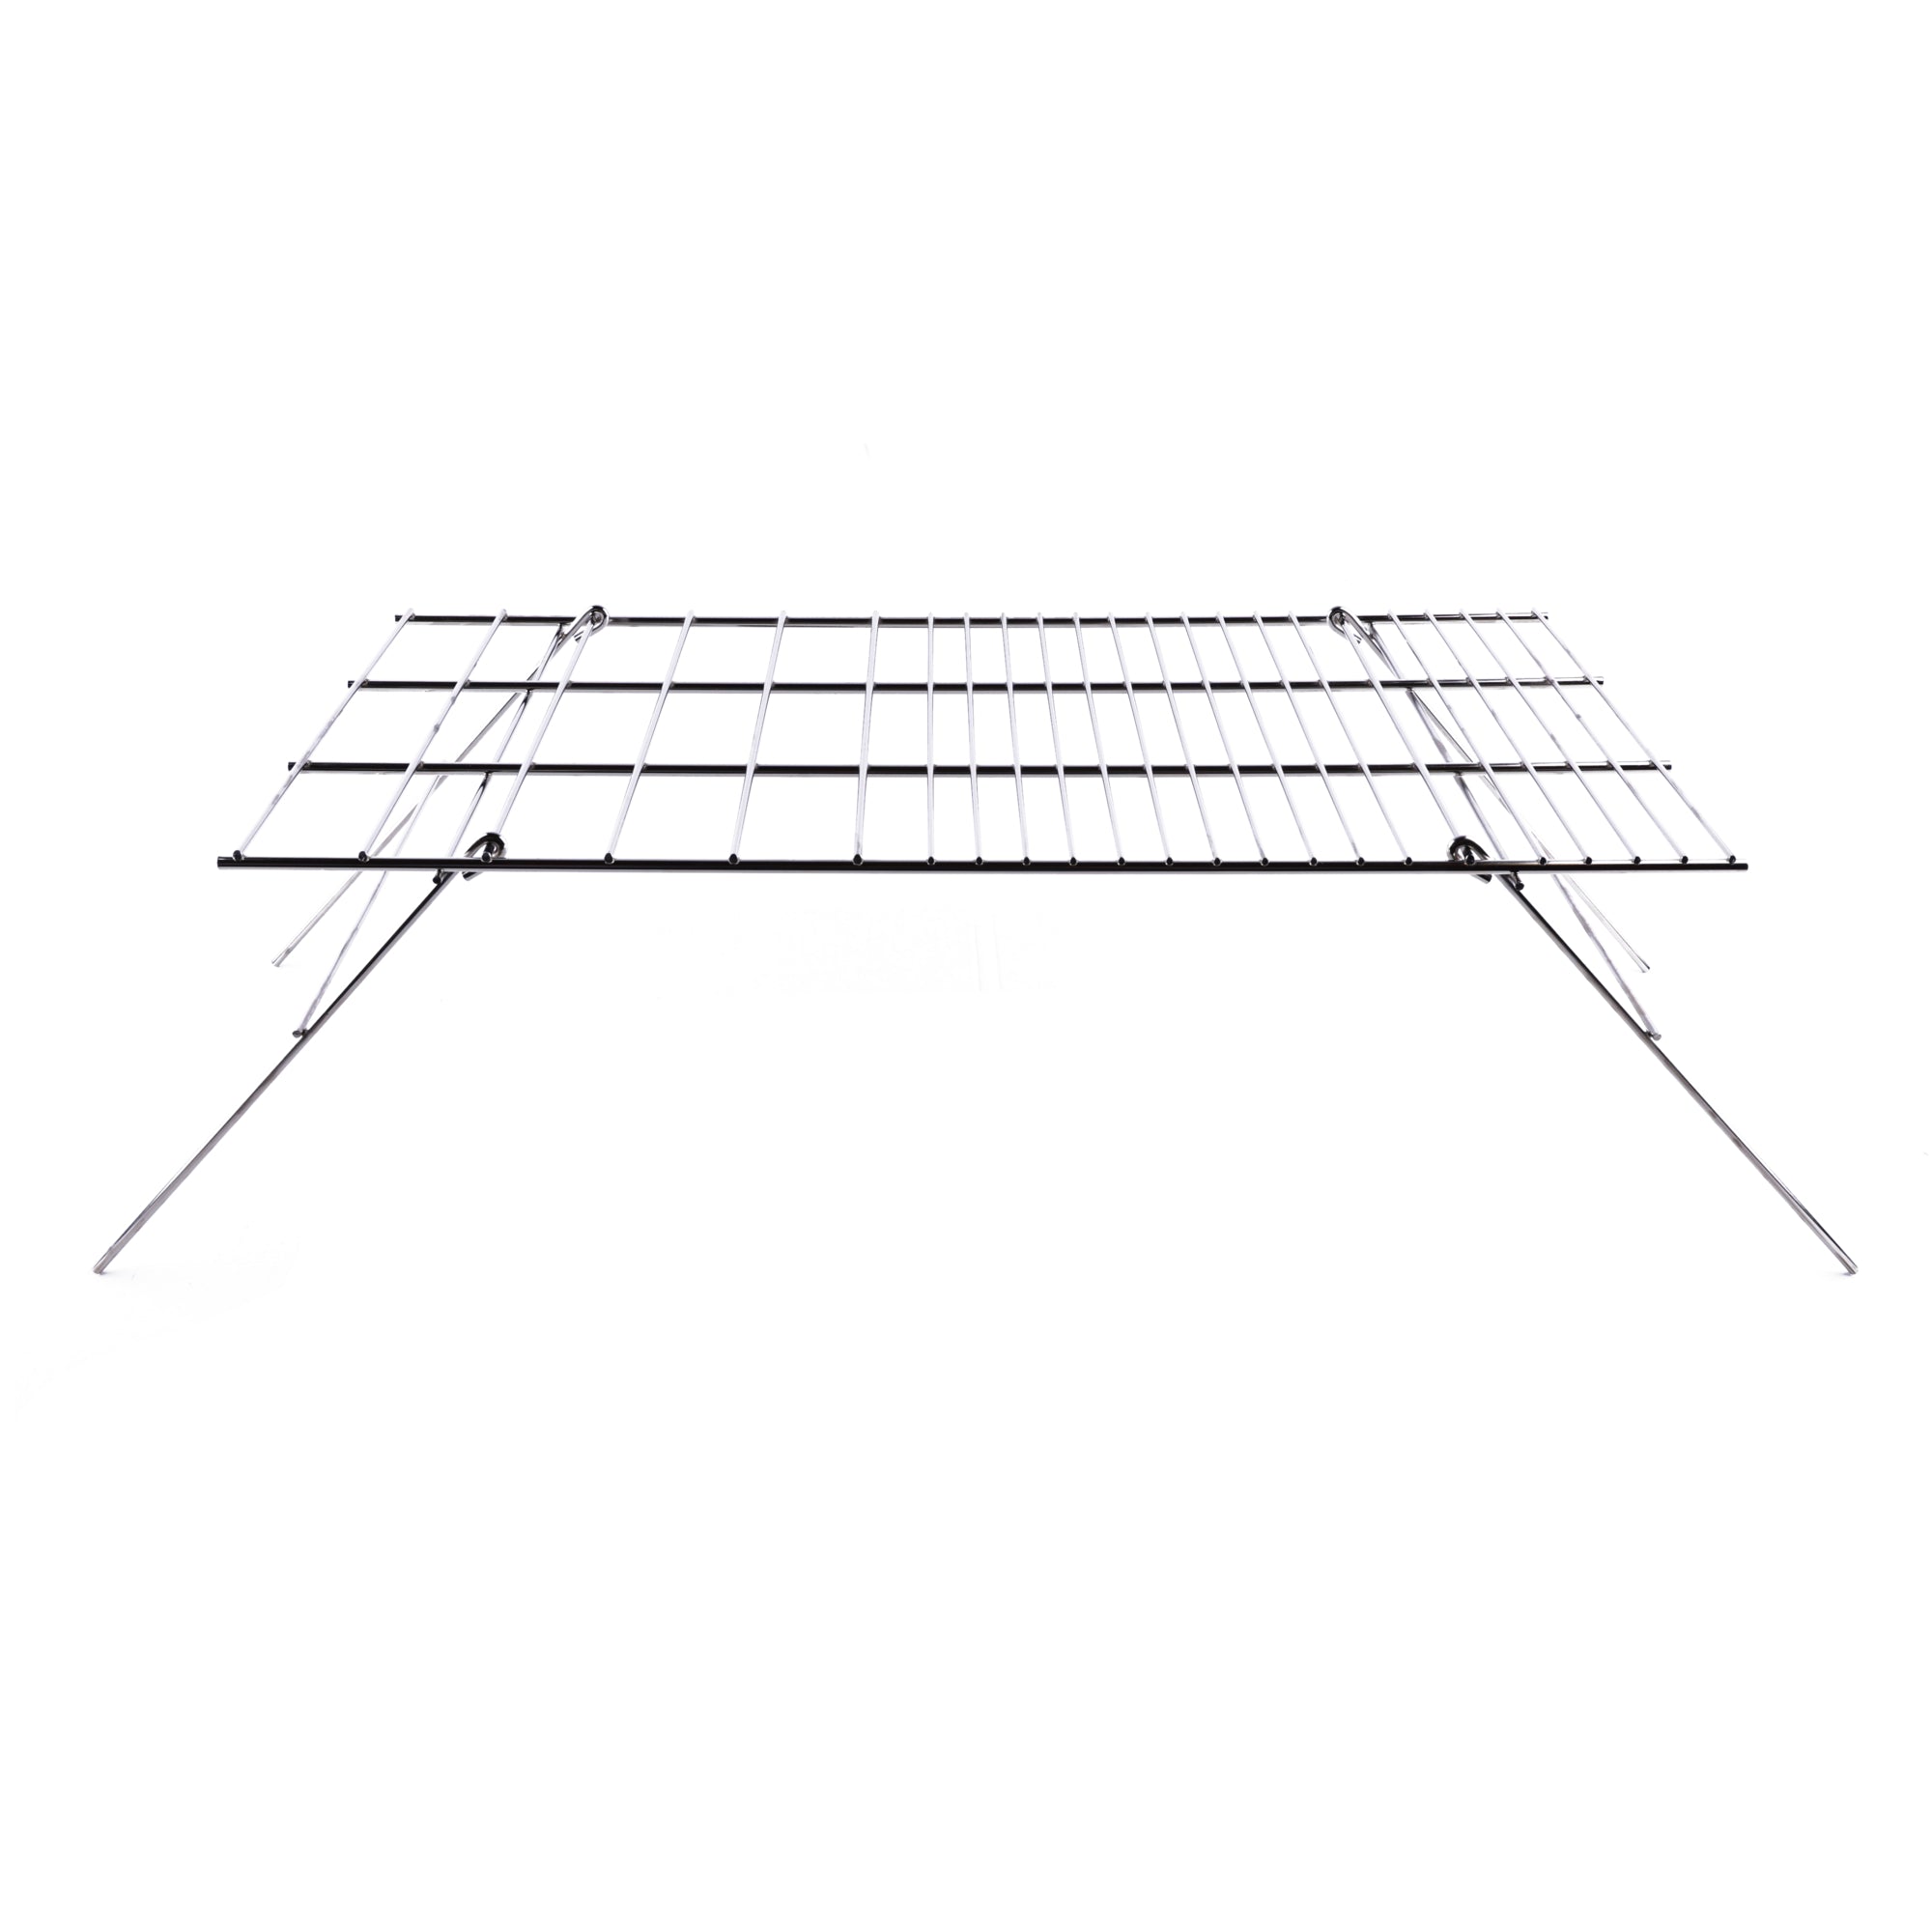 CHARCOAL BARBECUE CARBONELLA 40x60x90 FURNACE CAMPING GRID GARDEN